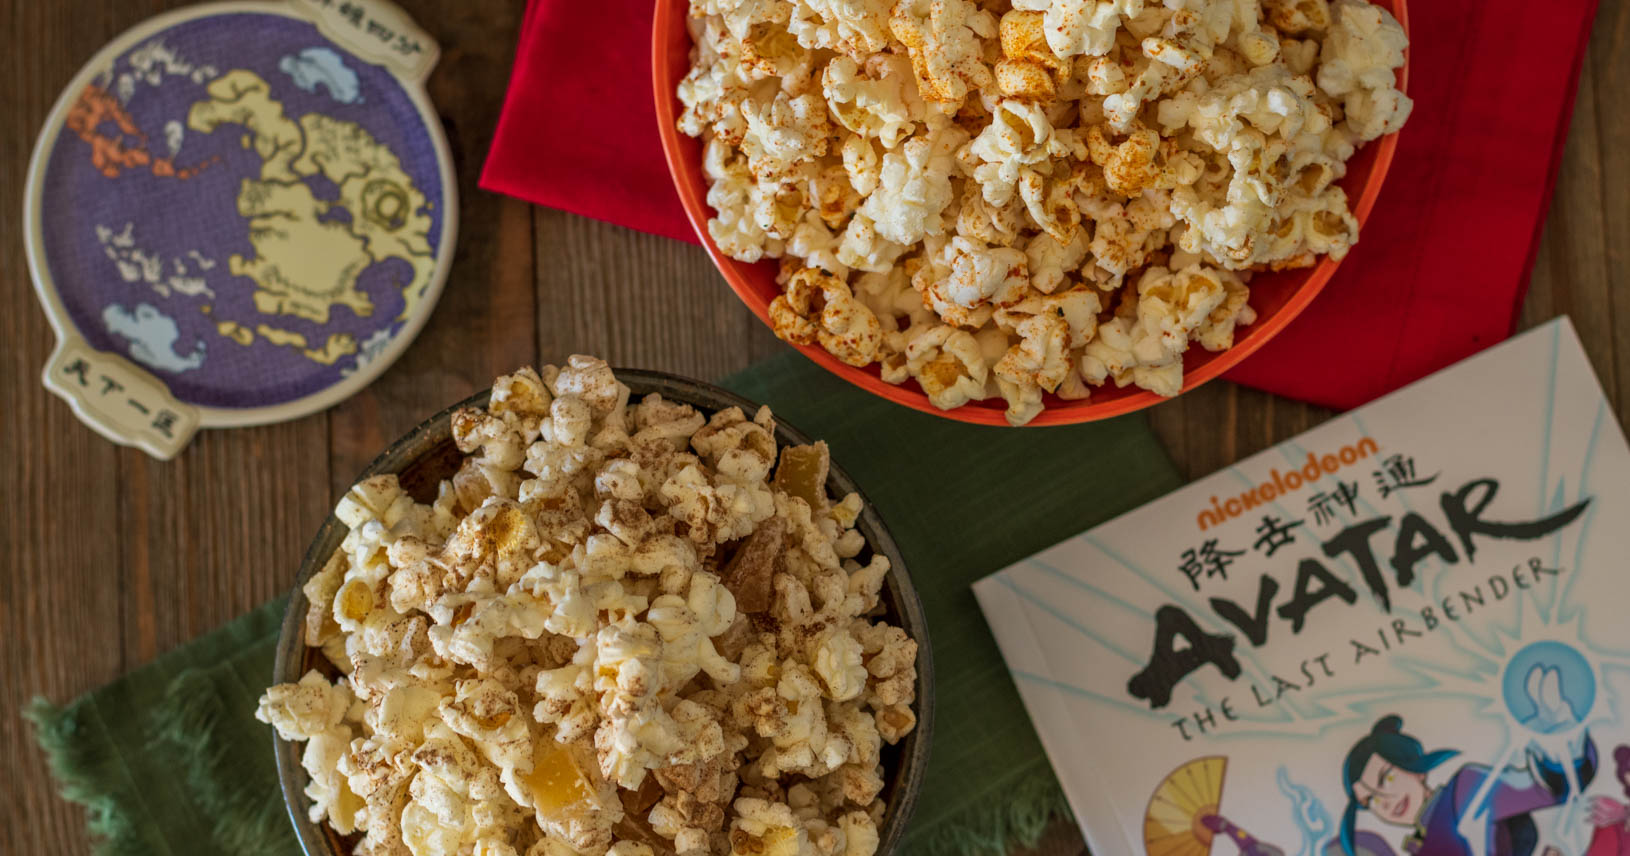 [AD] The Geeks have created a new sponsored recipe for an Avatar Adversaries Popcorn Duo inspired by the hit show Avatar: The Last Airbender. 2geekswhoeat.com #AvatarAdversaries #Avatar #Nickelodeon #Popcorn #GeekyRecipes #GeekyFood